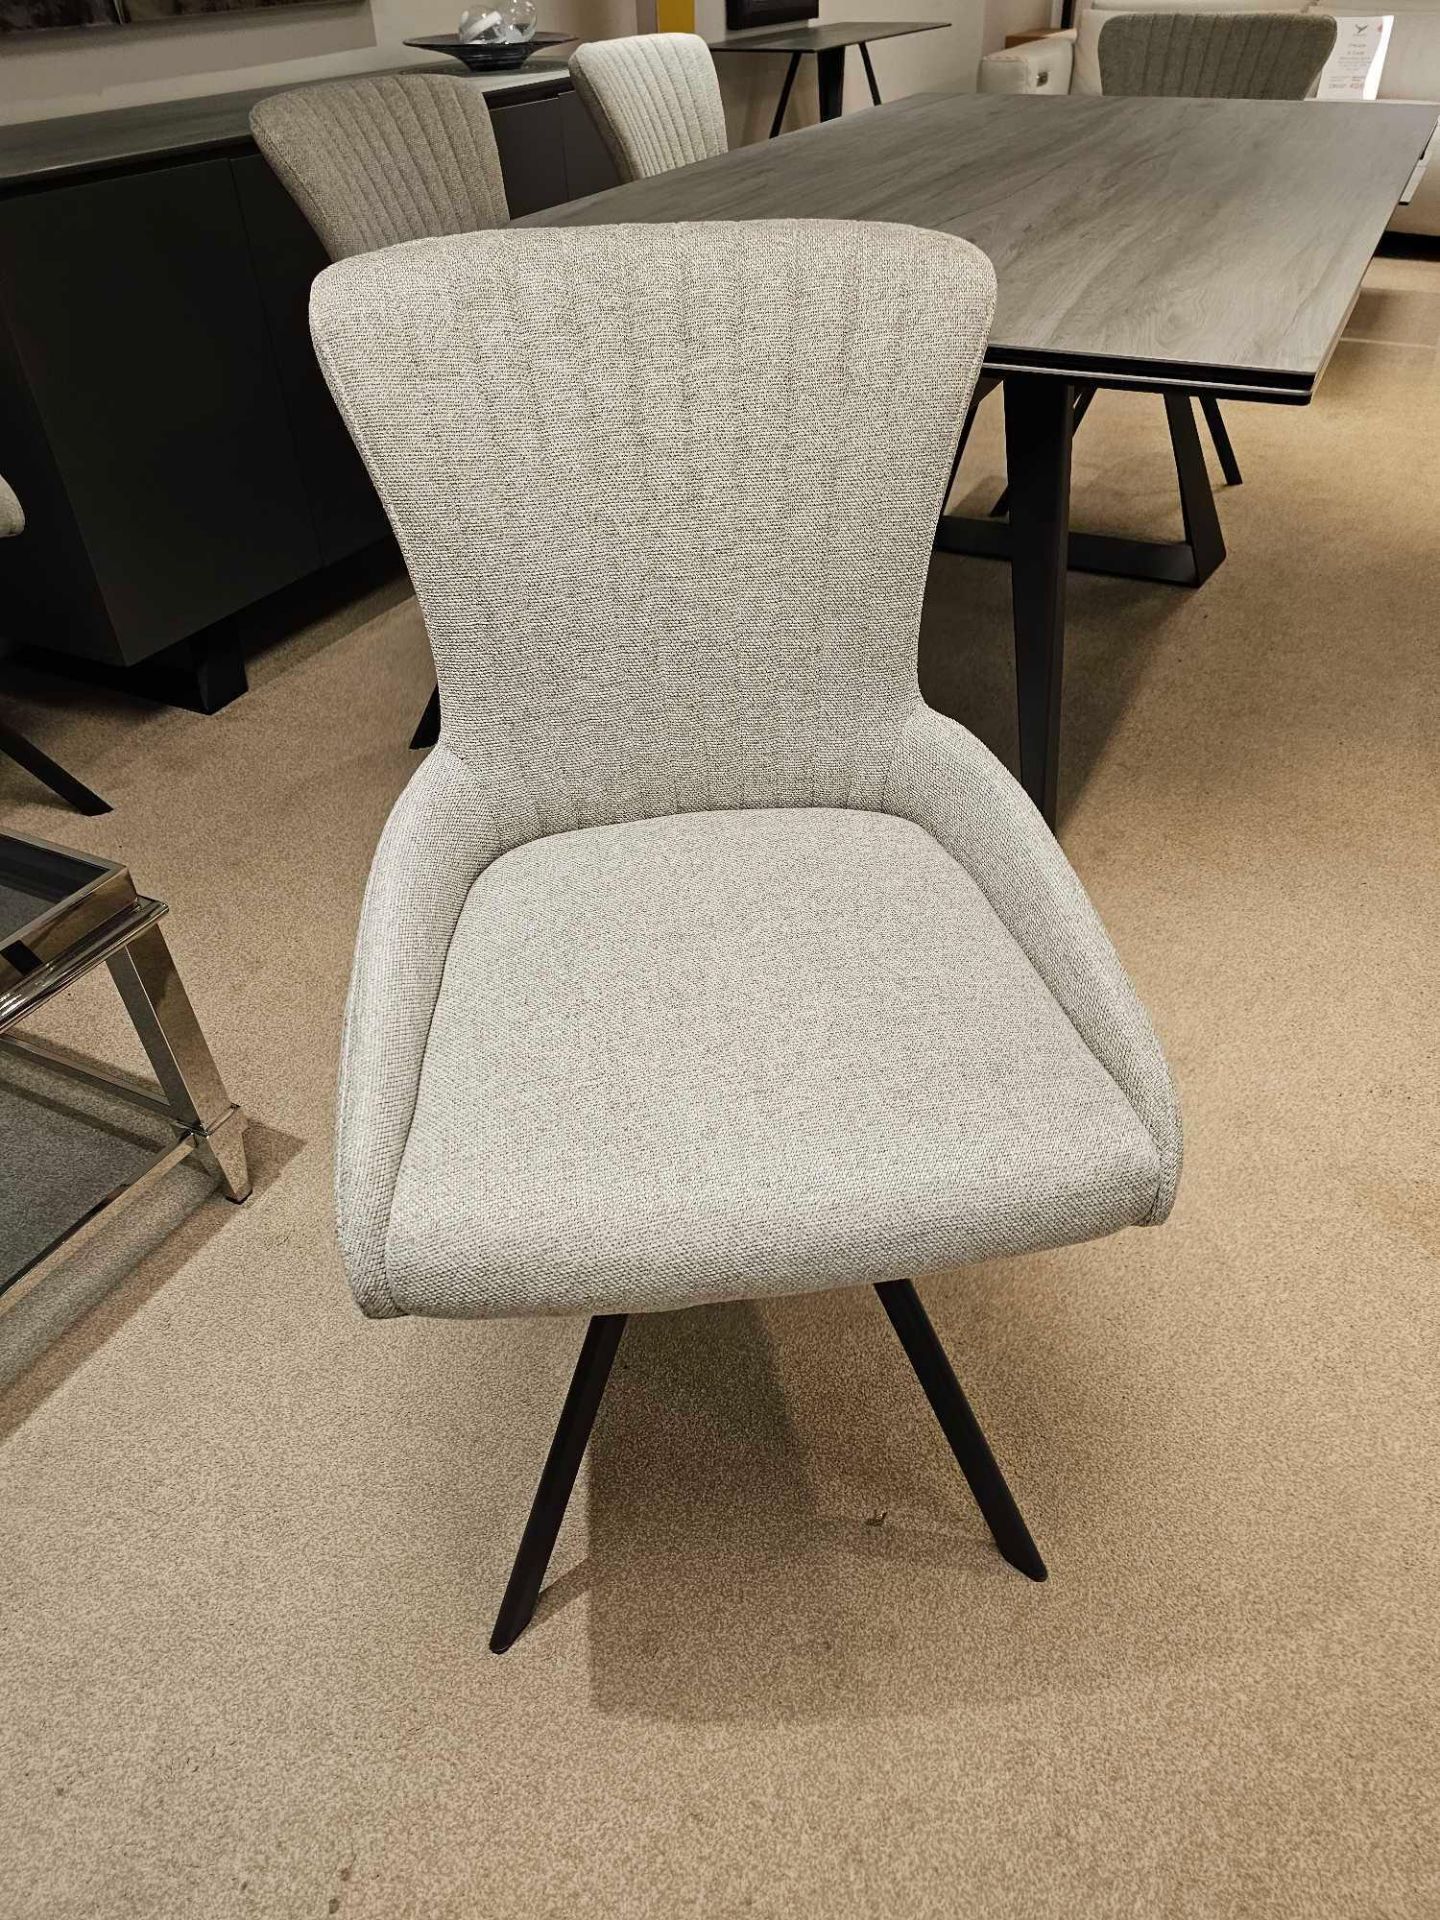 A Set of 6 x Maria Chairs by Kesterport Maria has the same self-return mechanism as many of the - Image 6 of 9